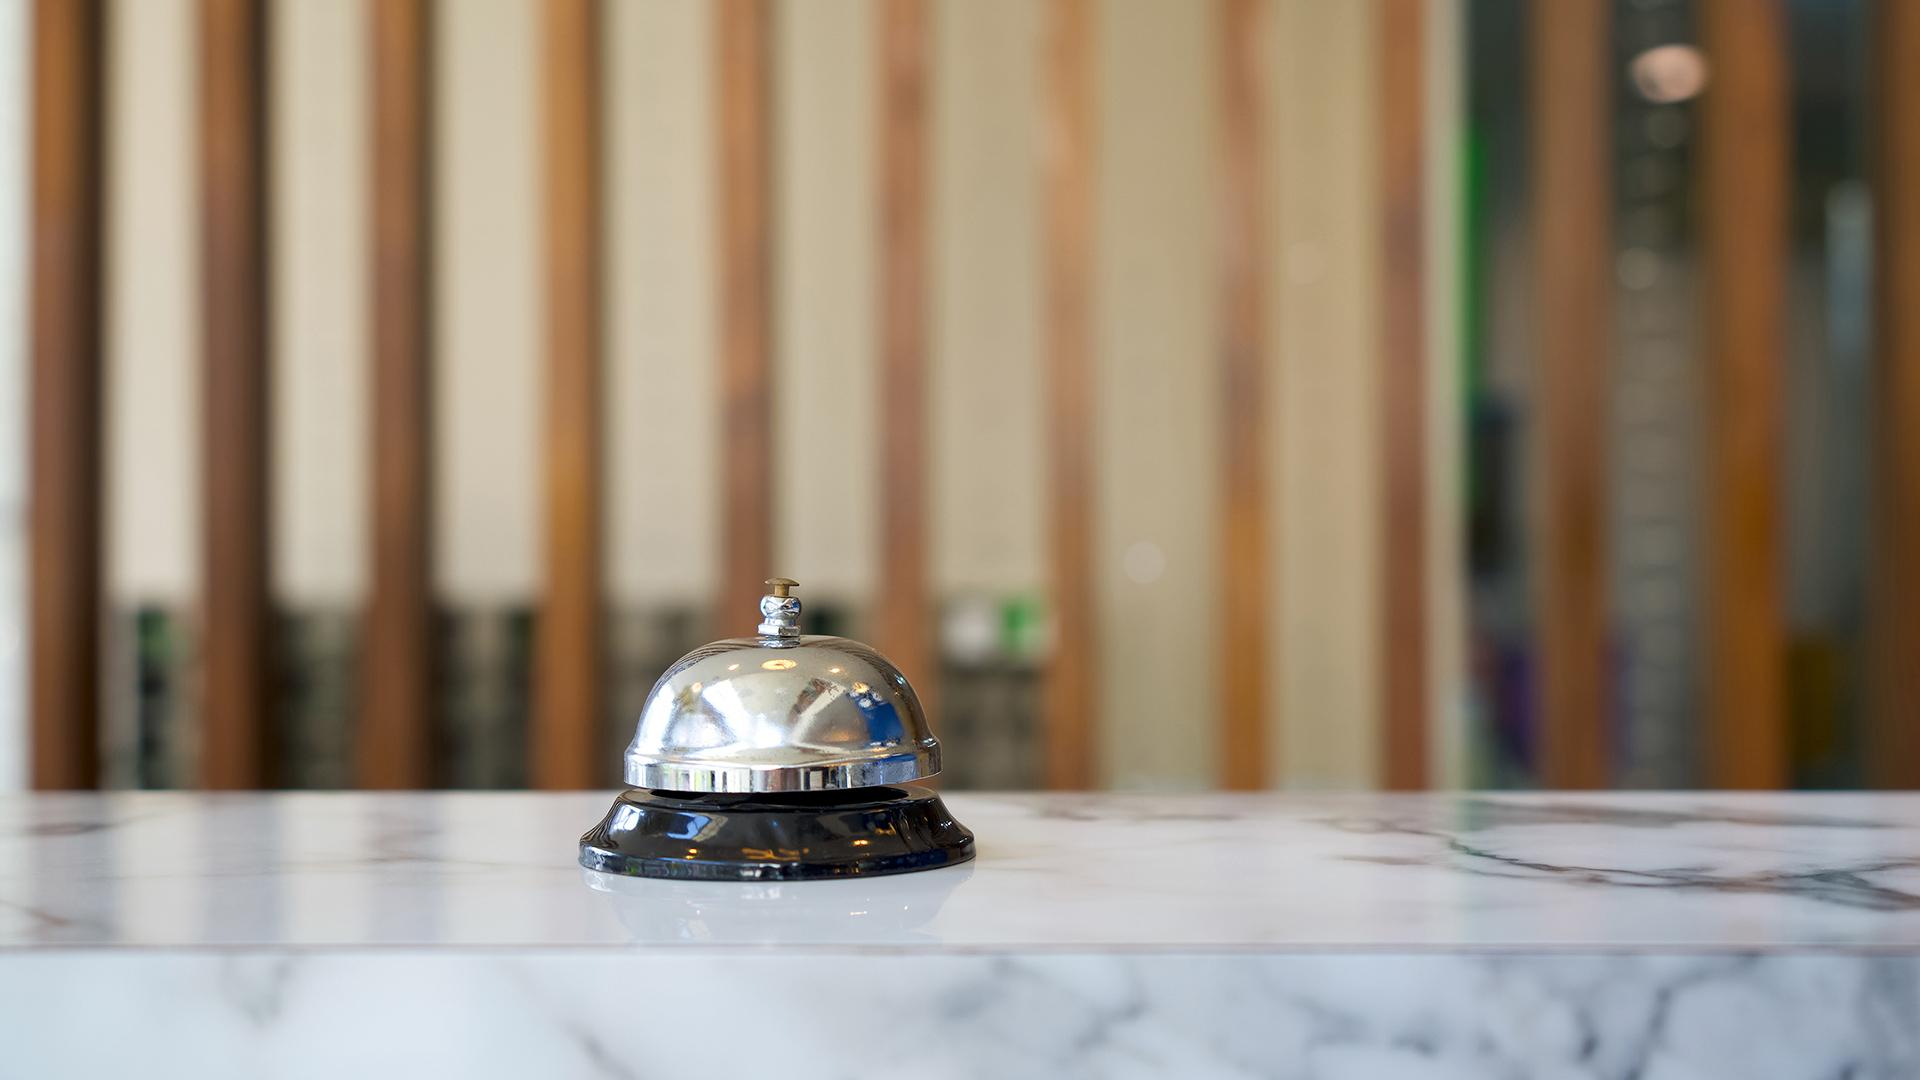 A hotel desk bell on a marble counter top.